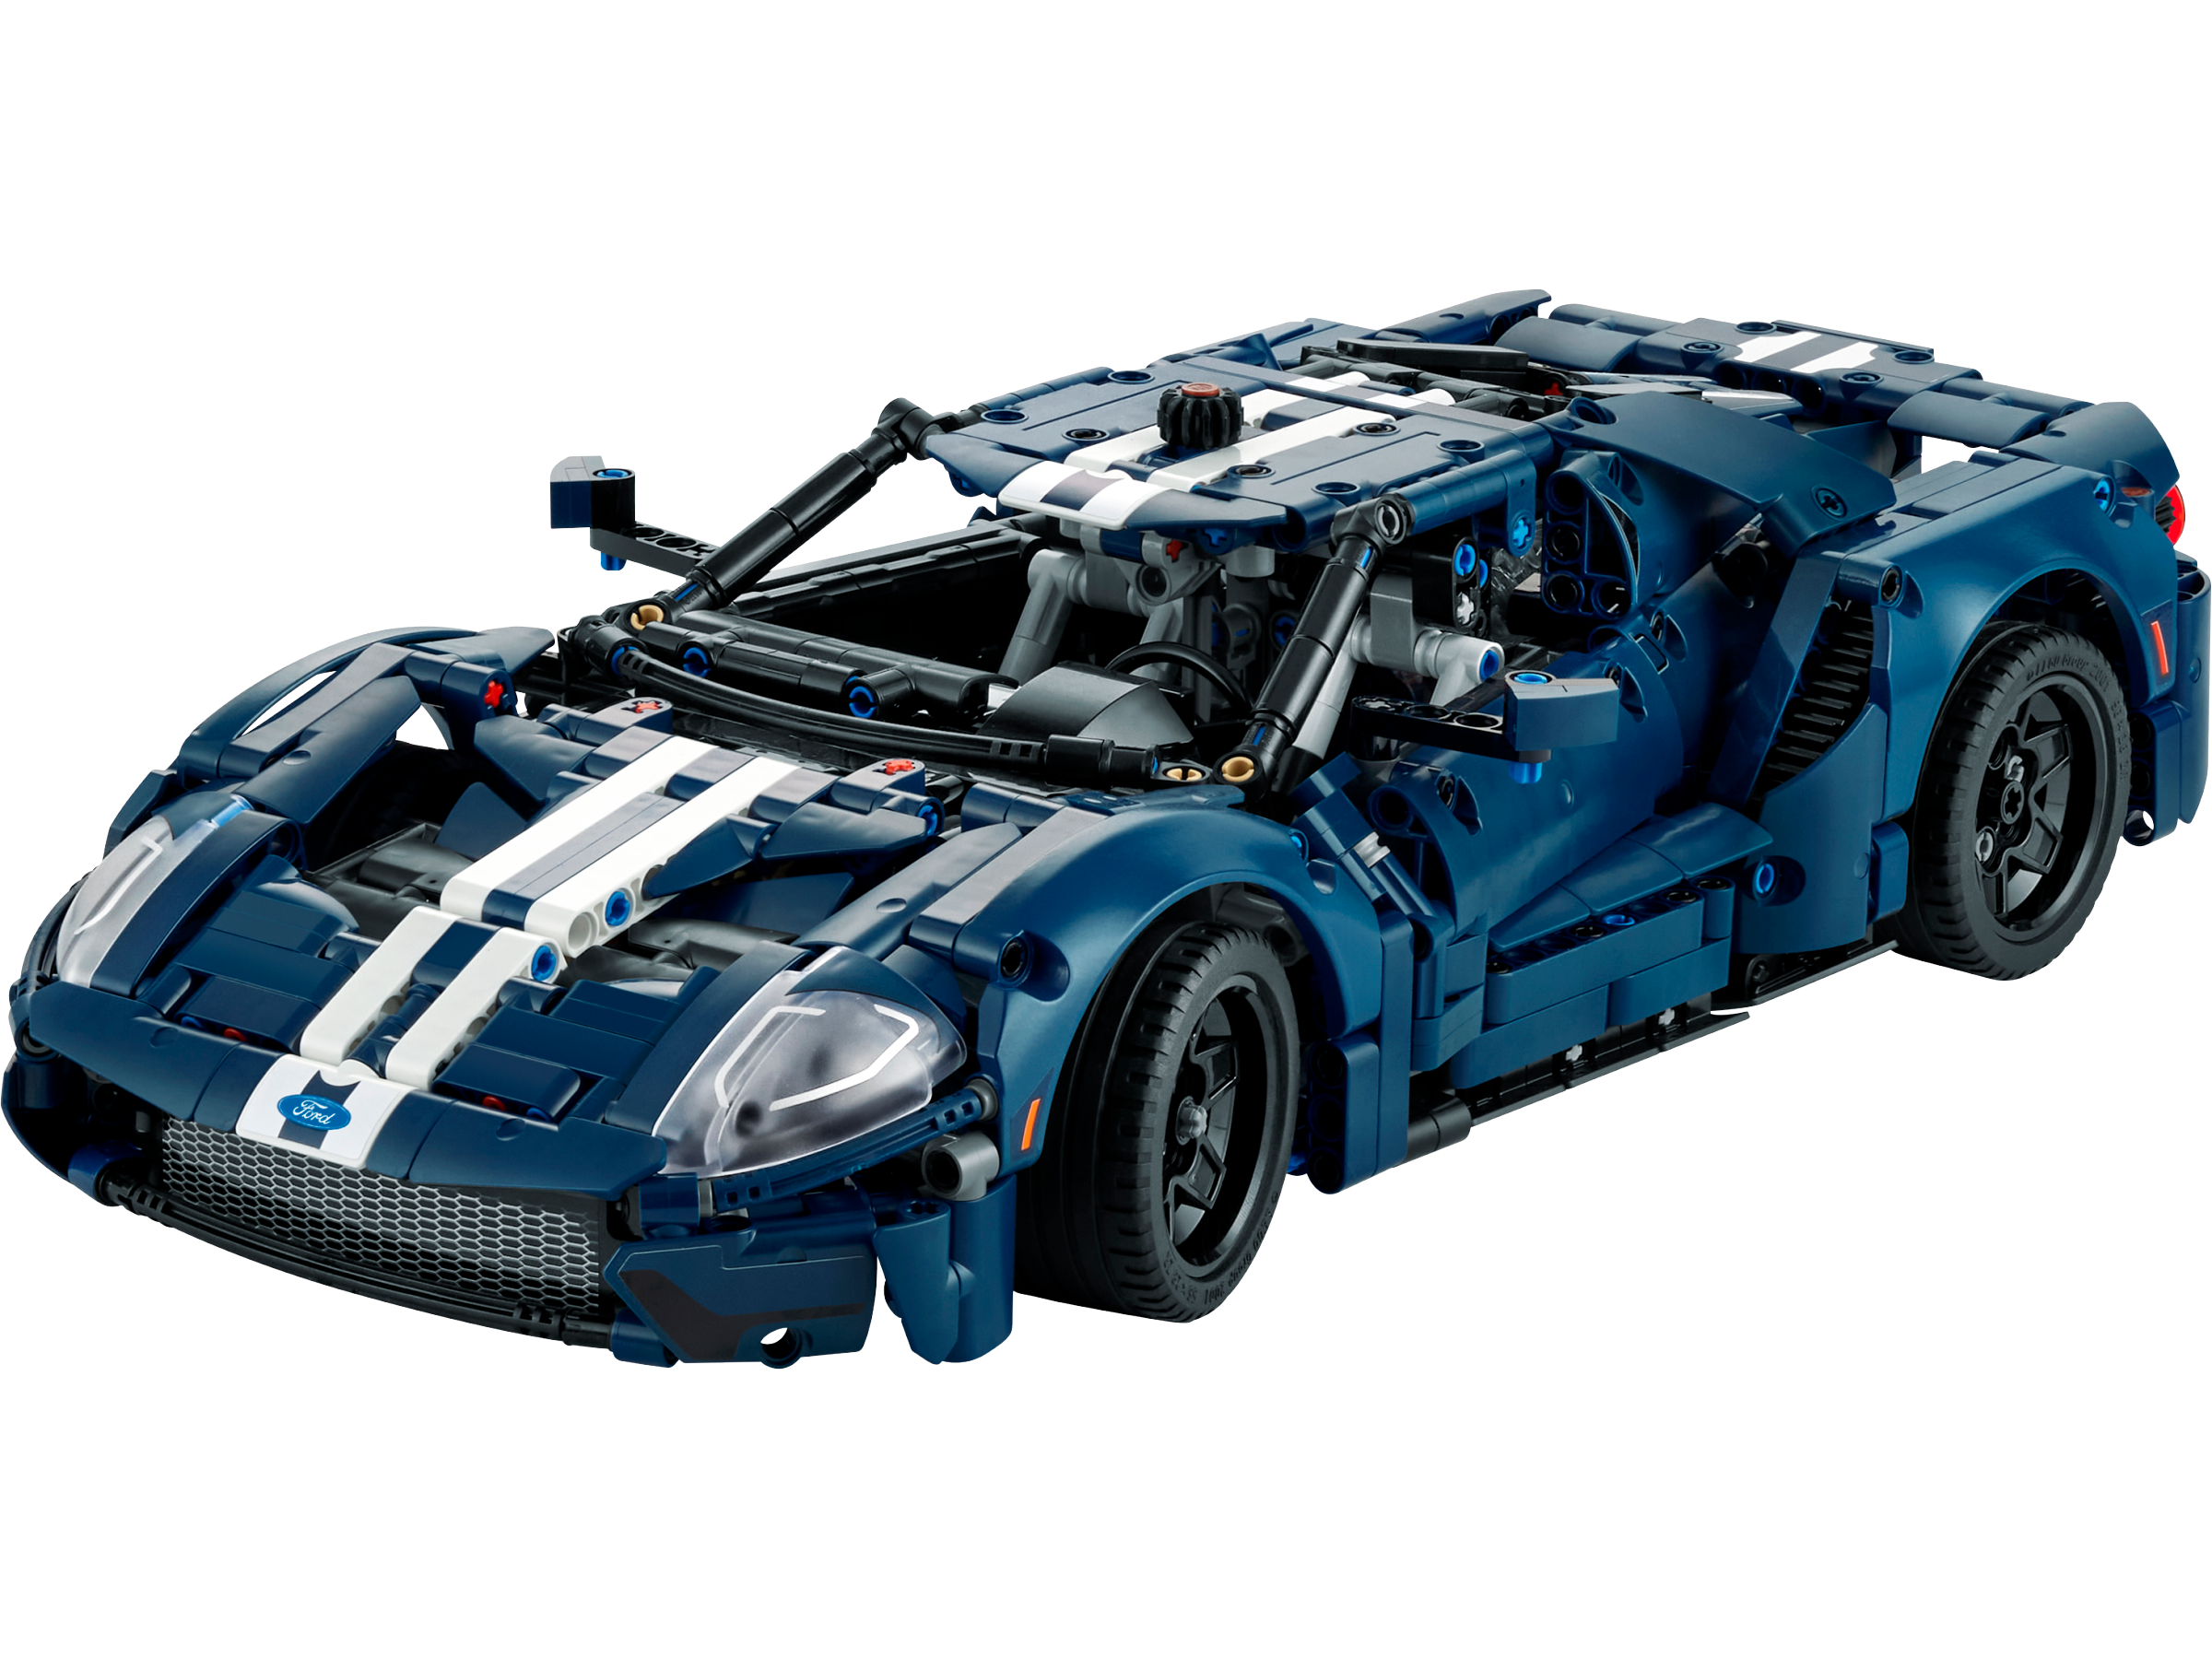 945 lukke perler Lego Now Makes a Ford GT You Don't Need Permission to Buy